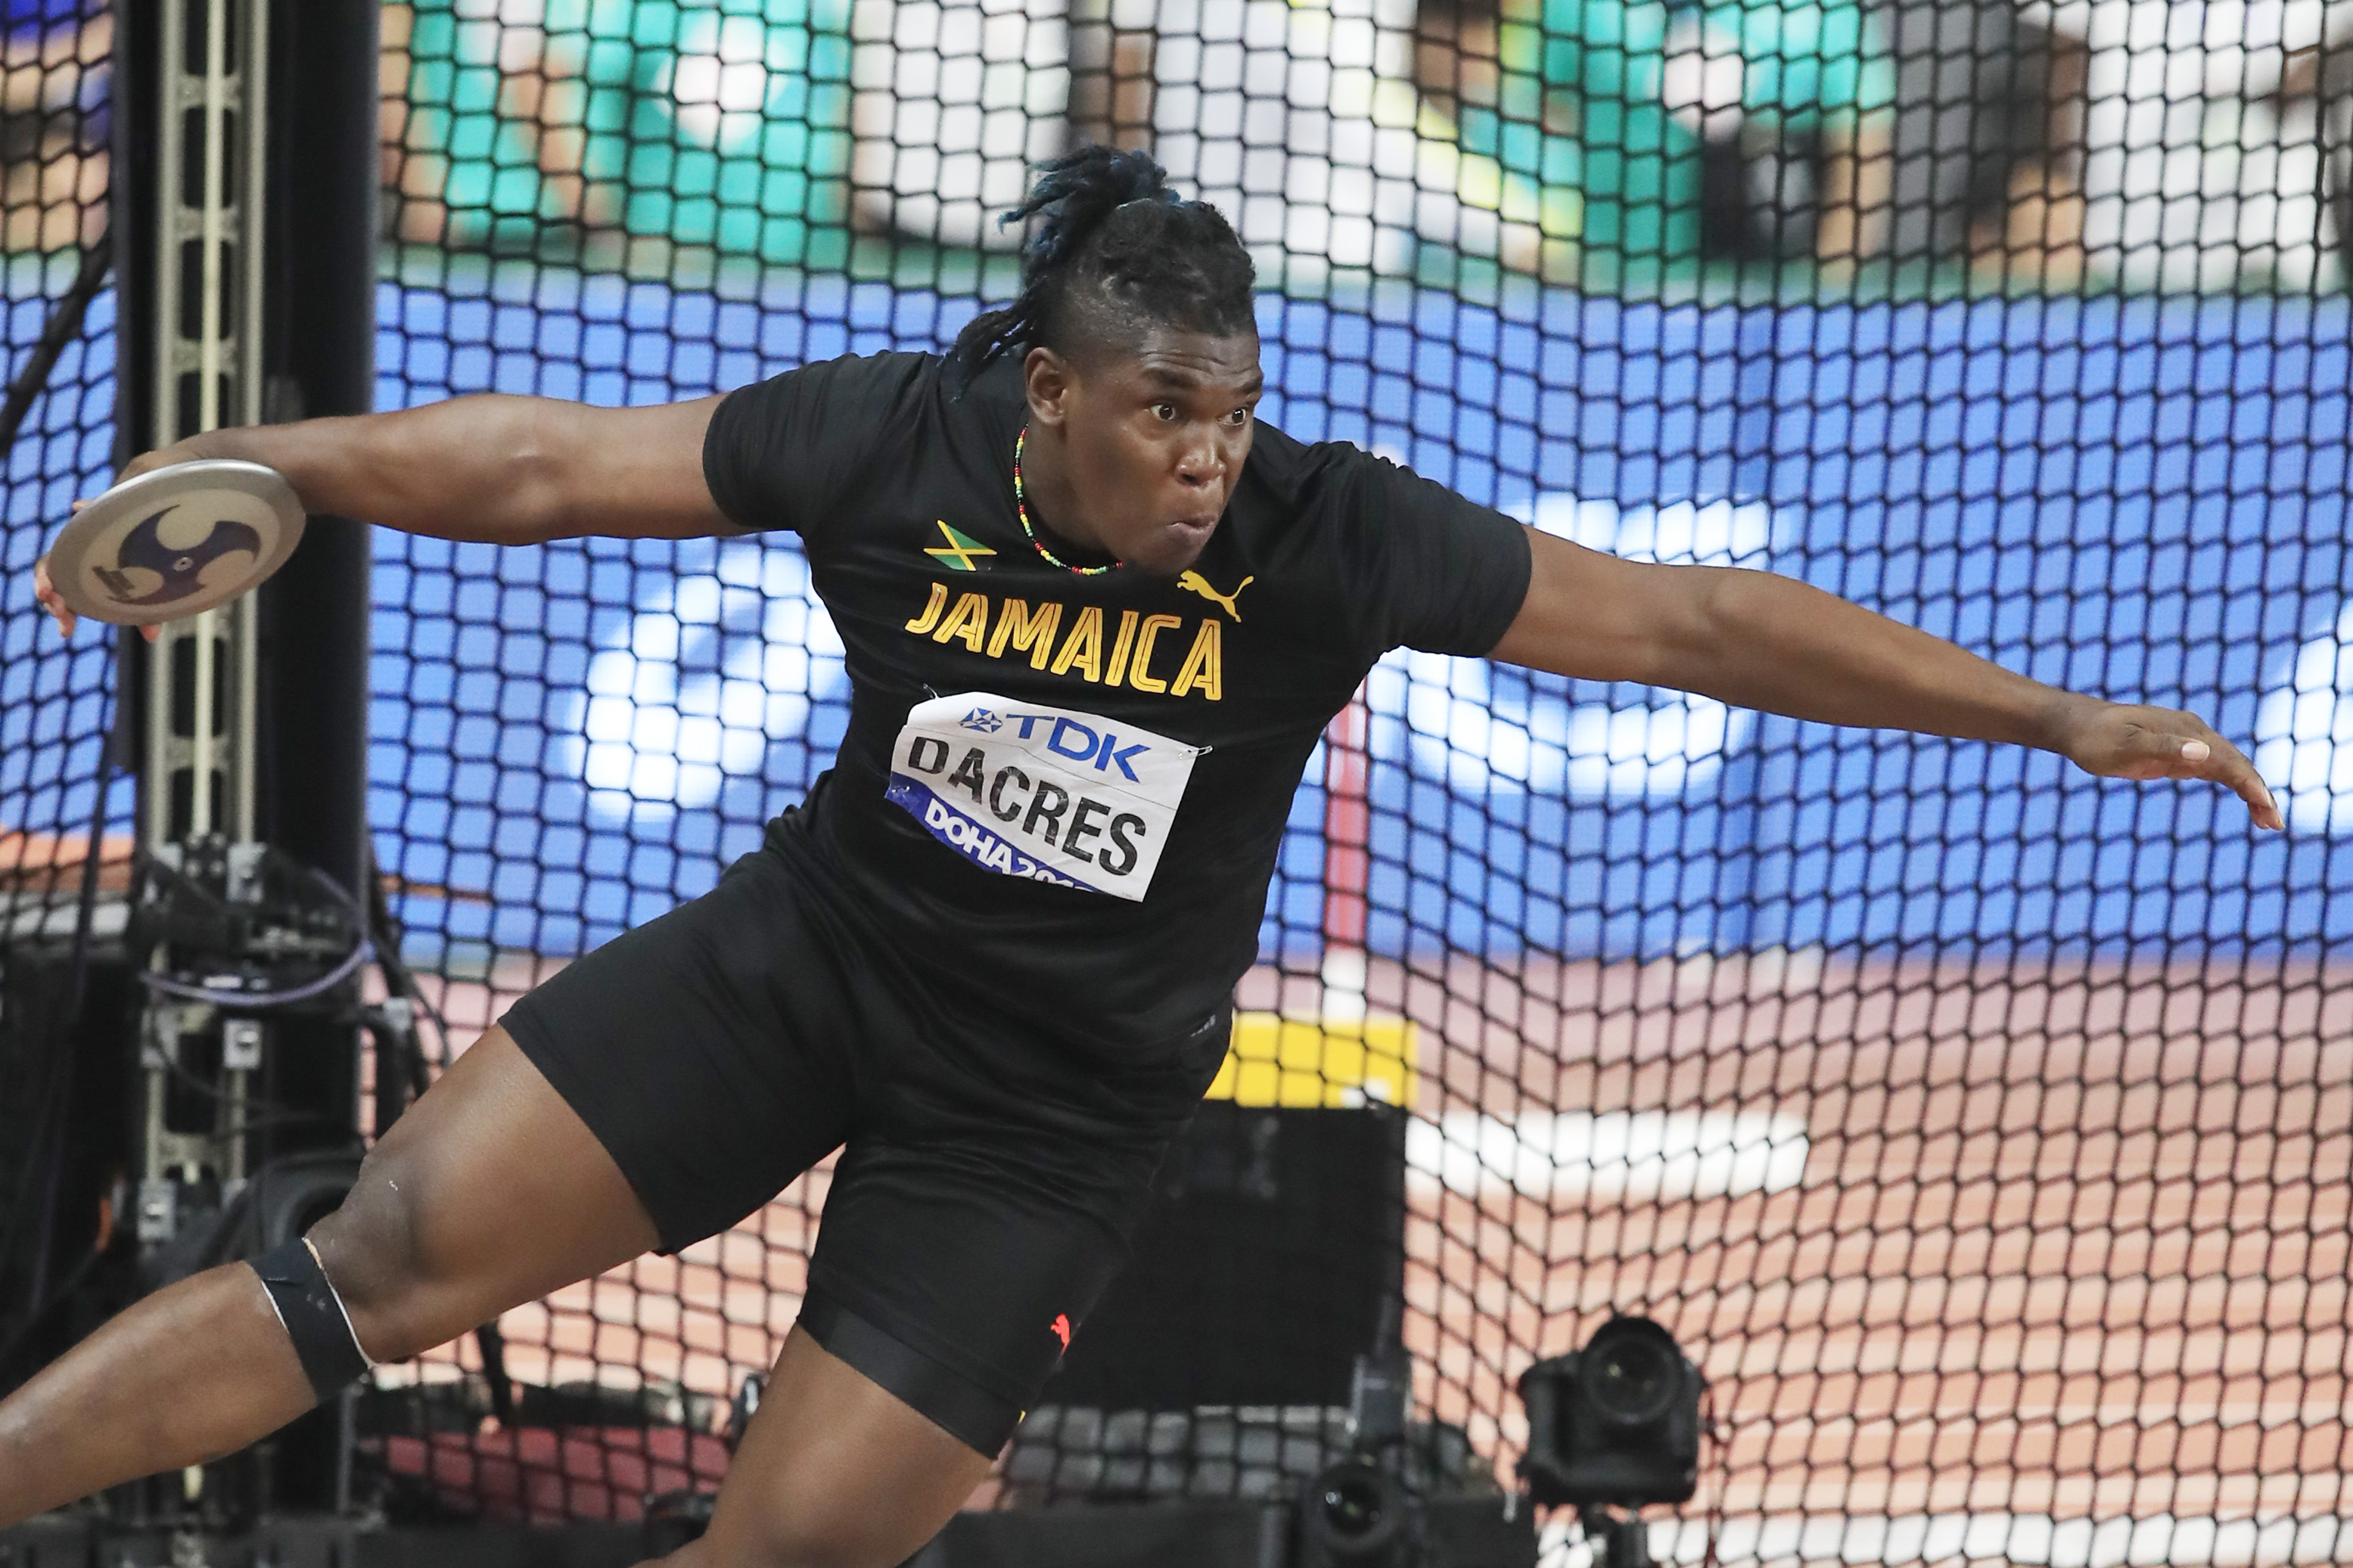 Athletes continue to shine indoor and outdoor